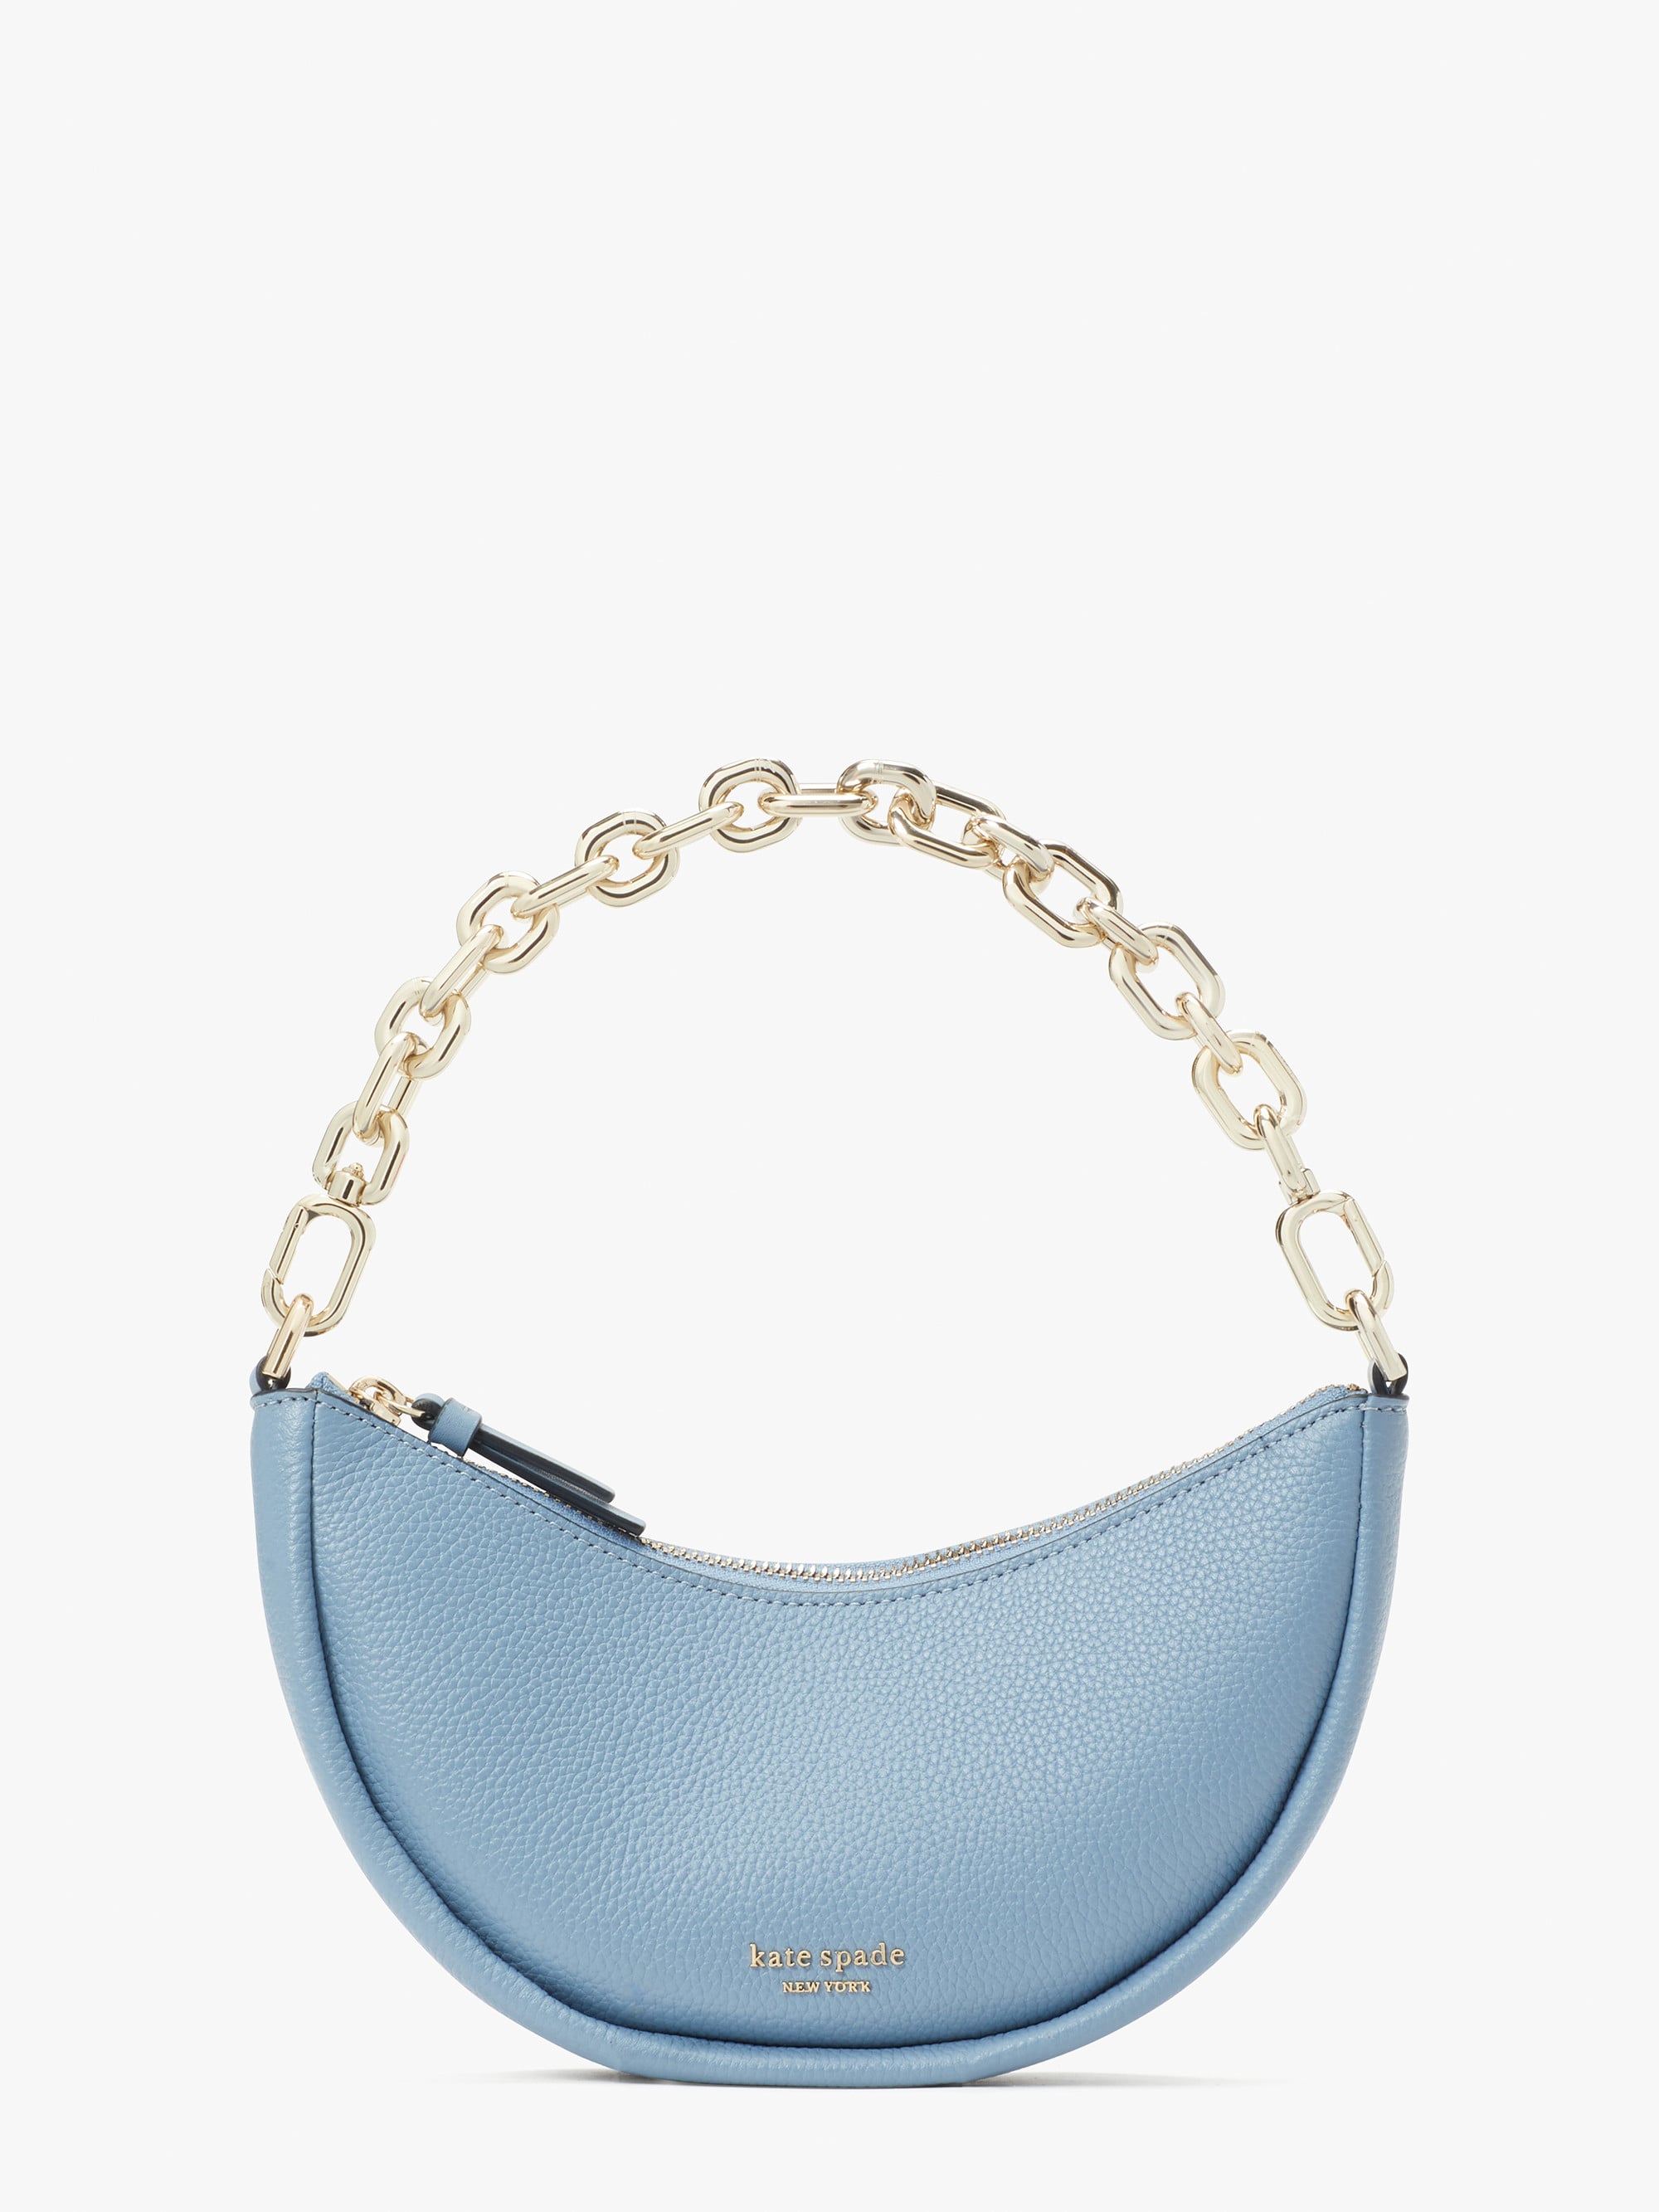 The Fashionista Favourite: Kate Spade New York Smile Small Crossbody, The  15 Prettiest Spring Handbags to Shop From Kate Spade's Sale